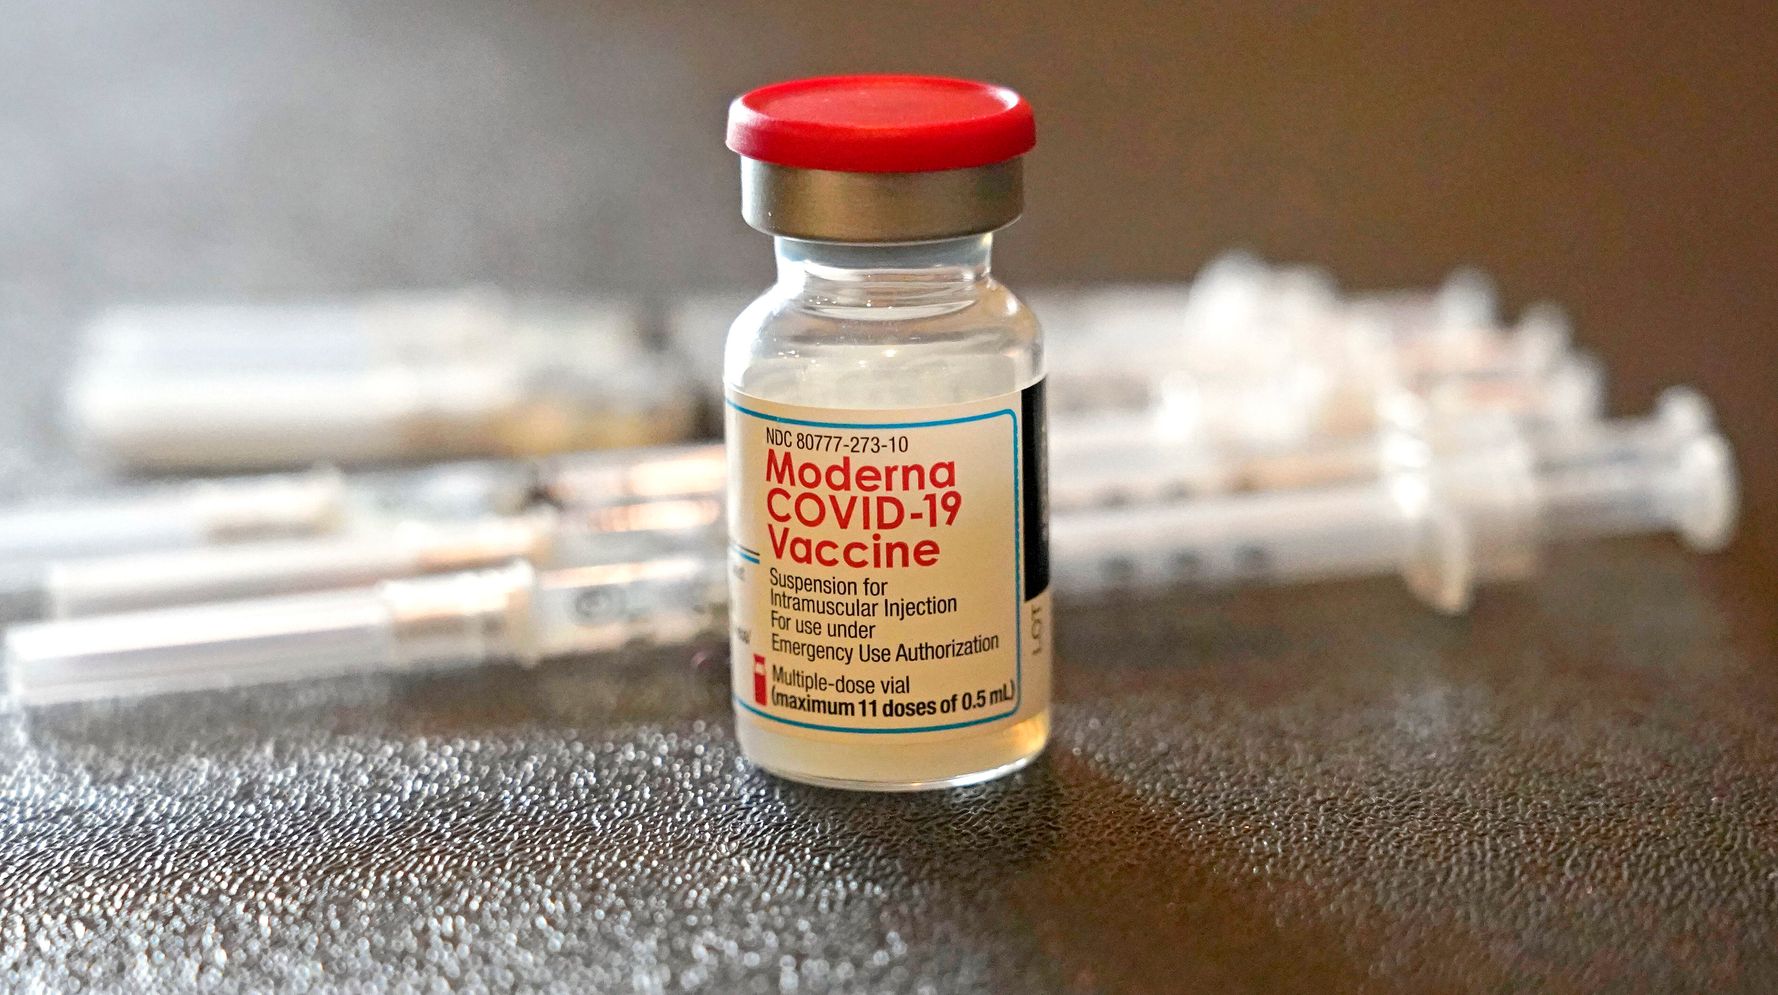 Moderna President Says 4th Vaccine Dose Beneficial, But Not Necessary For All